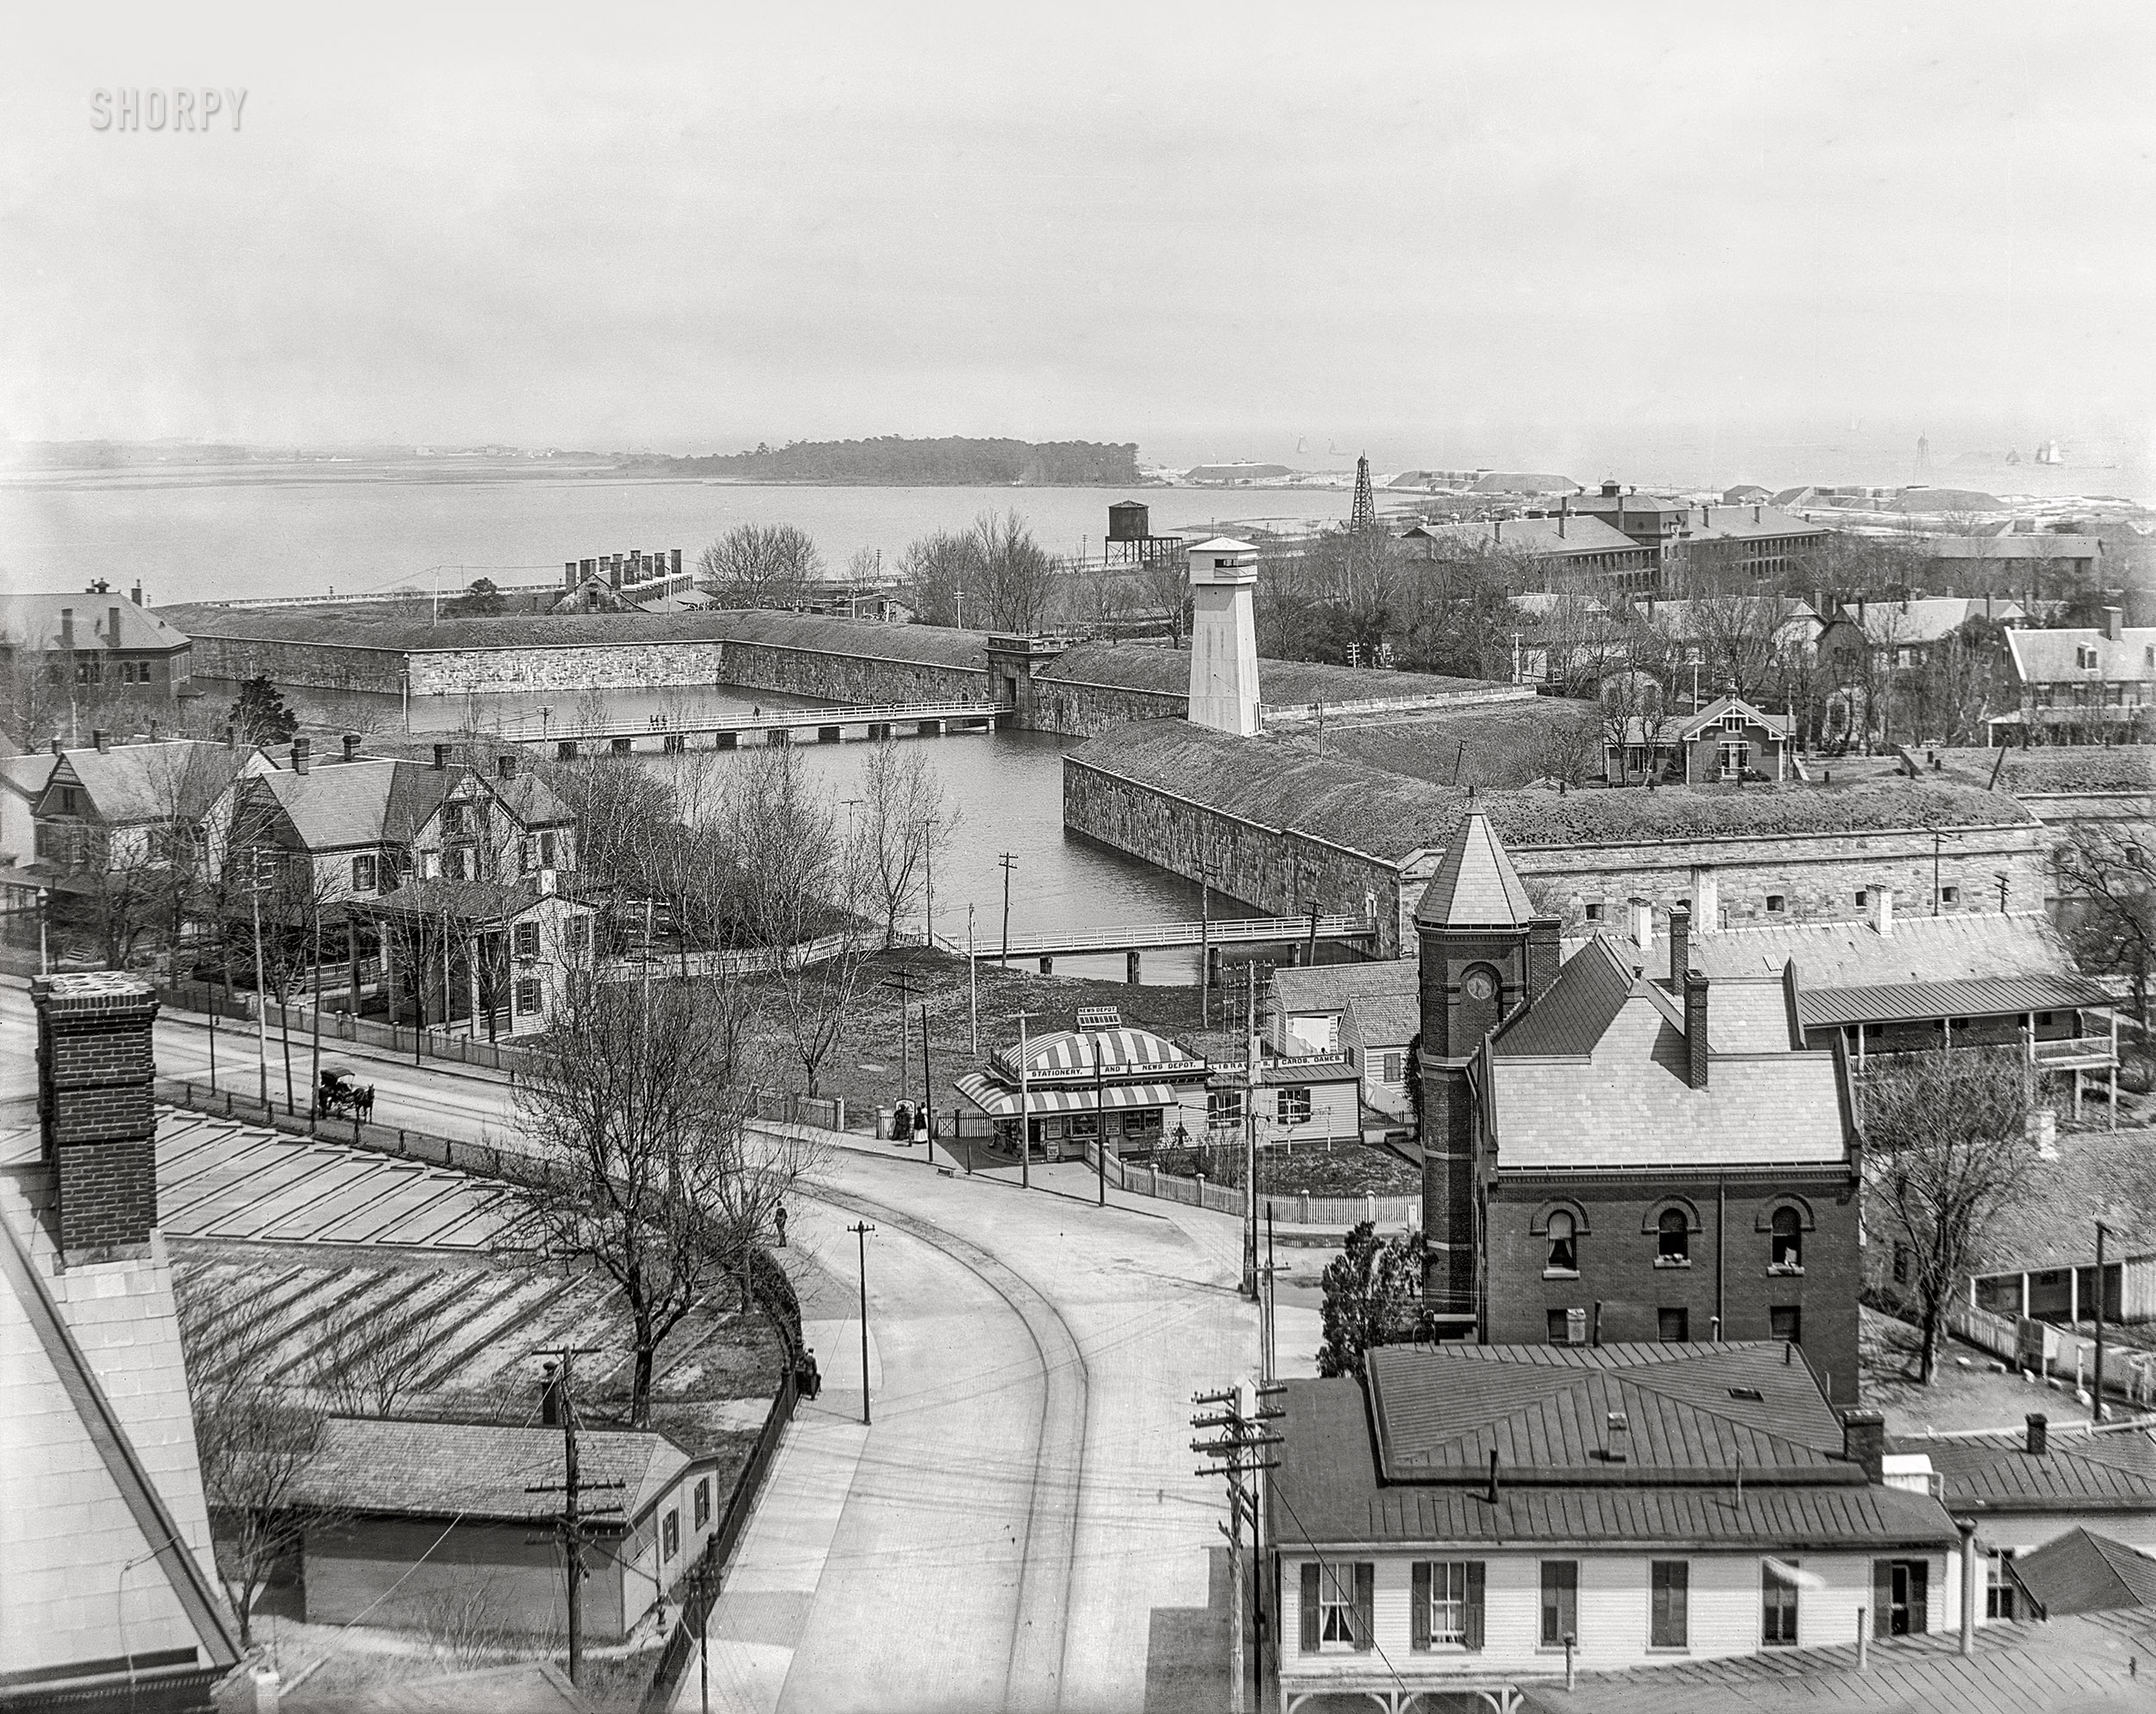 1902. "Fort Monroe, Old Point Comfort, Virginia." Home to the gaudily attired News Depot. 8x10 inch dry plate glass negative, Detroit Photographic Company. View full size.